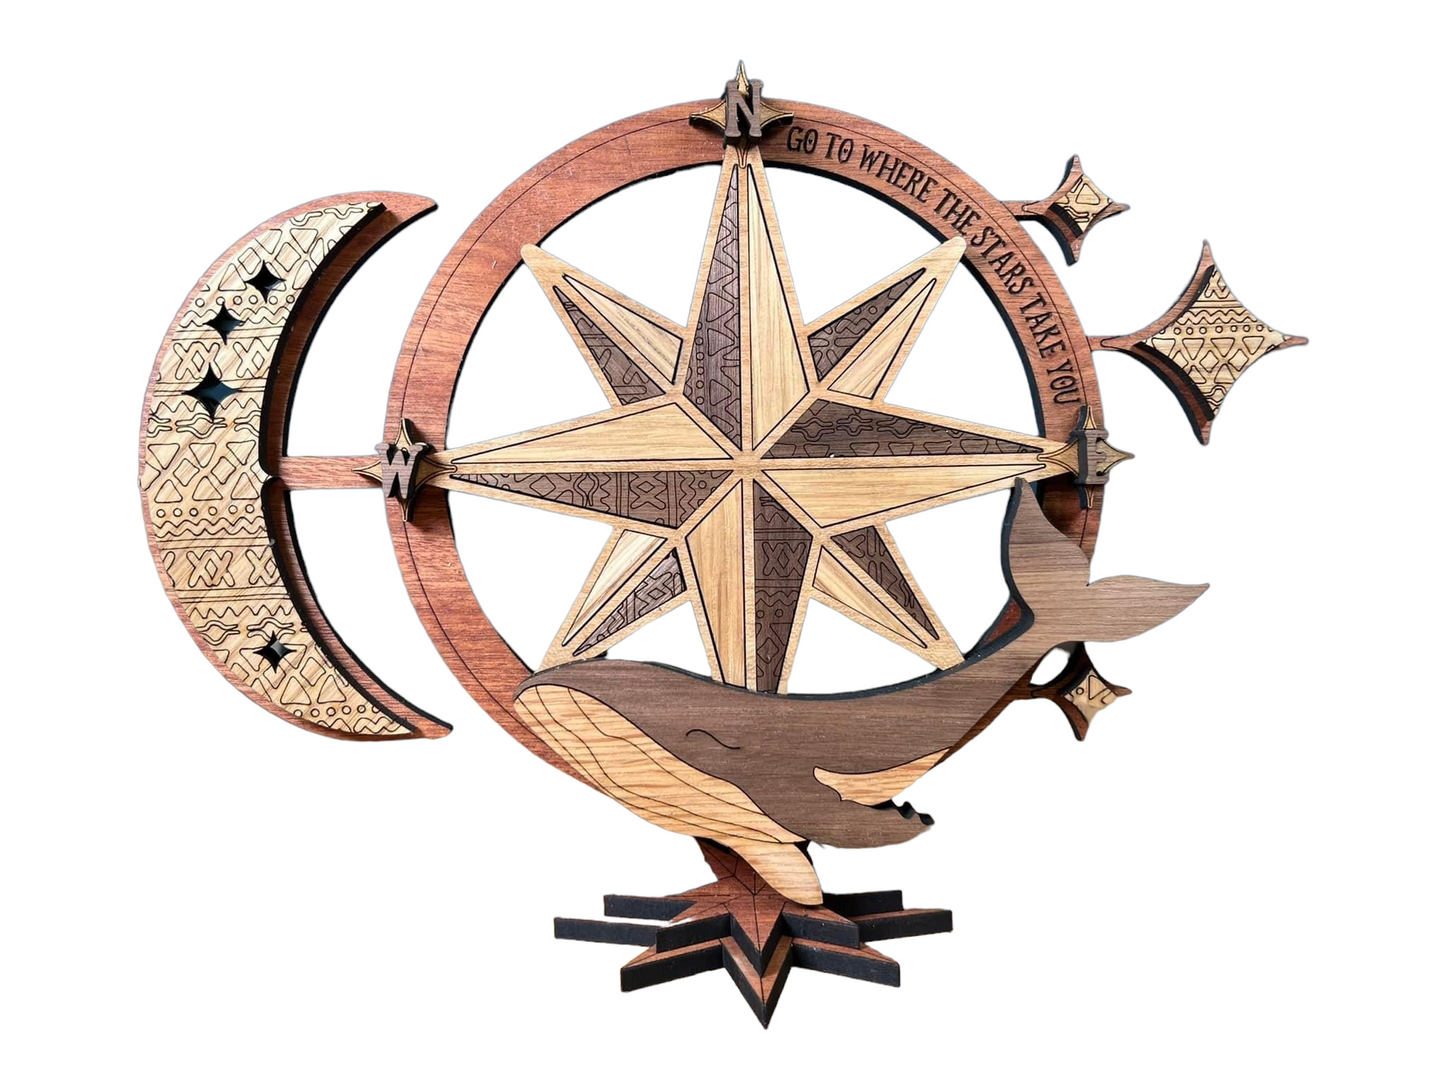 Compass shelf sitter | Go where the stars lead you | Perfect for retirement or a change in season in life